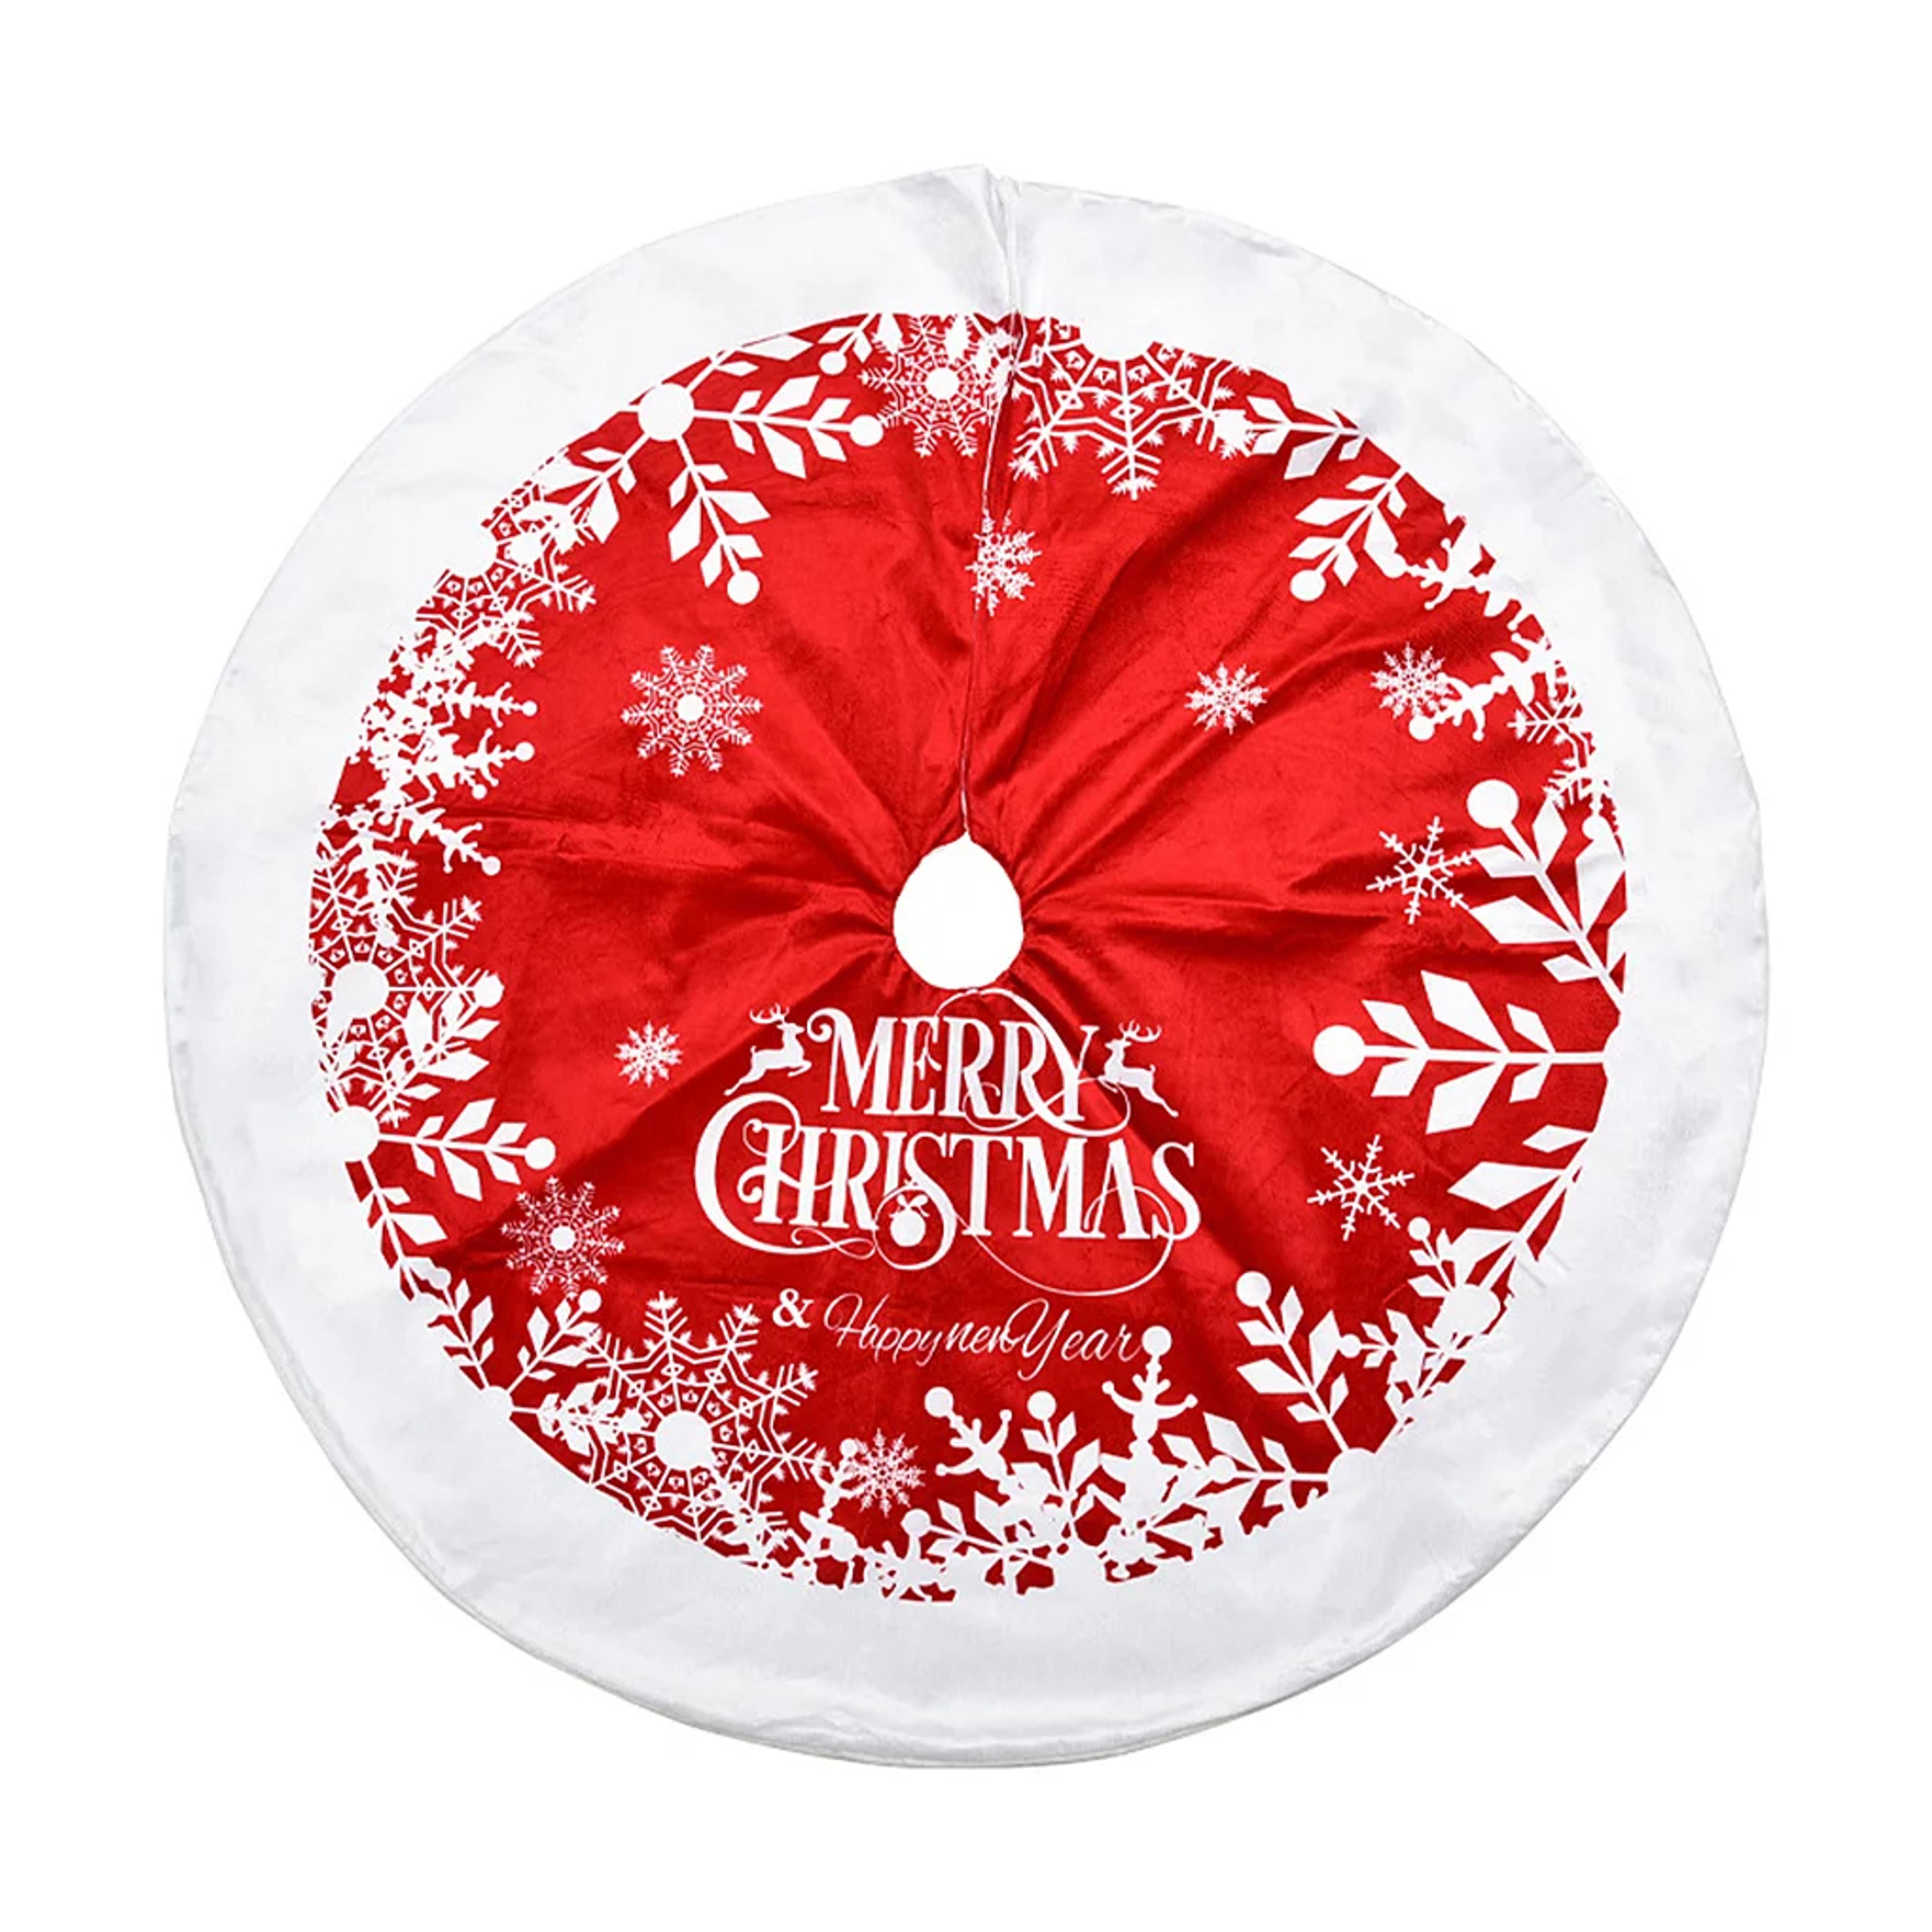 Christmas Tree Skirt Home Party Xmas Trees Base Cover Floor Carpet Decoration Round Mat Holiday Indoor Ornament, 90cm - Walmart.com